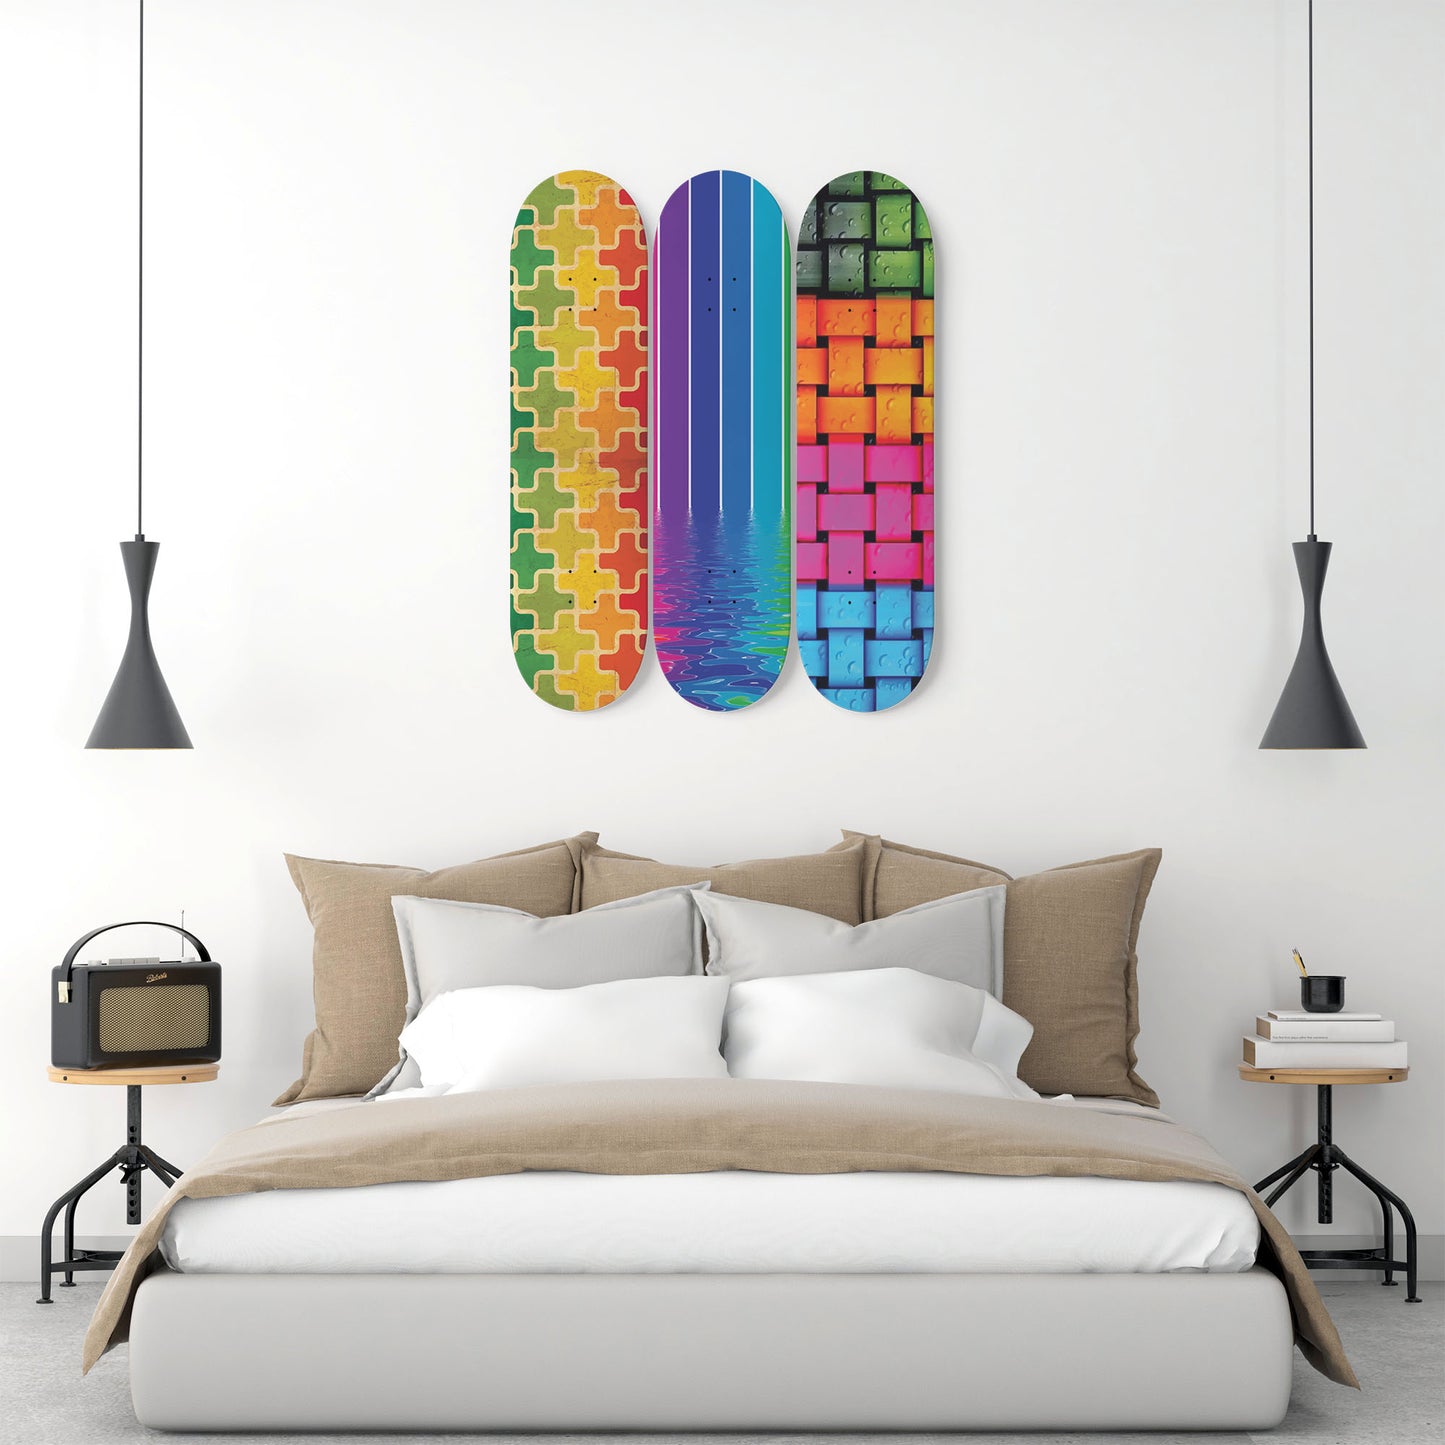 Random Colorful Artwork 3 | Skateboard Deck Wall Art, Wall Hanged Room Decoration, Maple Wood, Accent Gift for Home, Aesthetic Wall Art